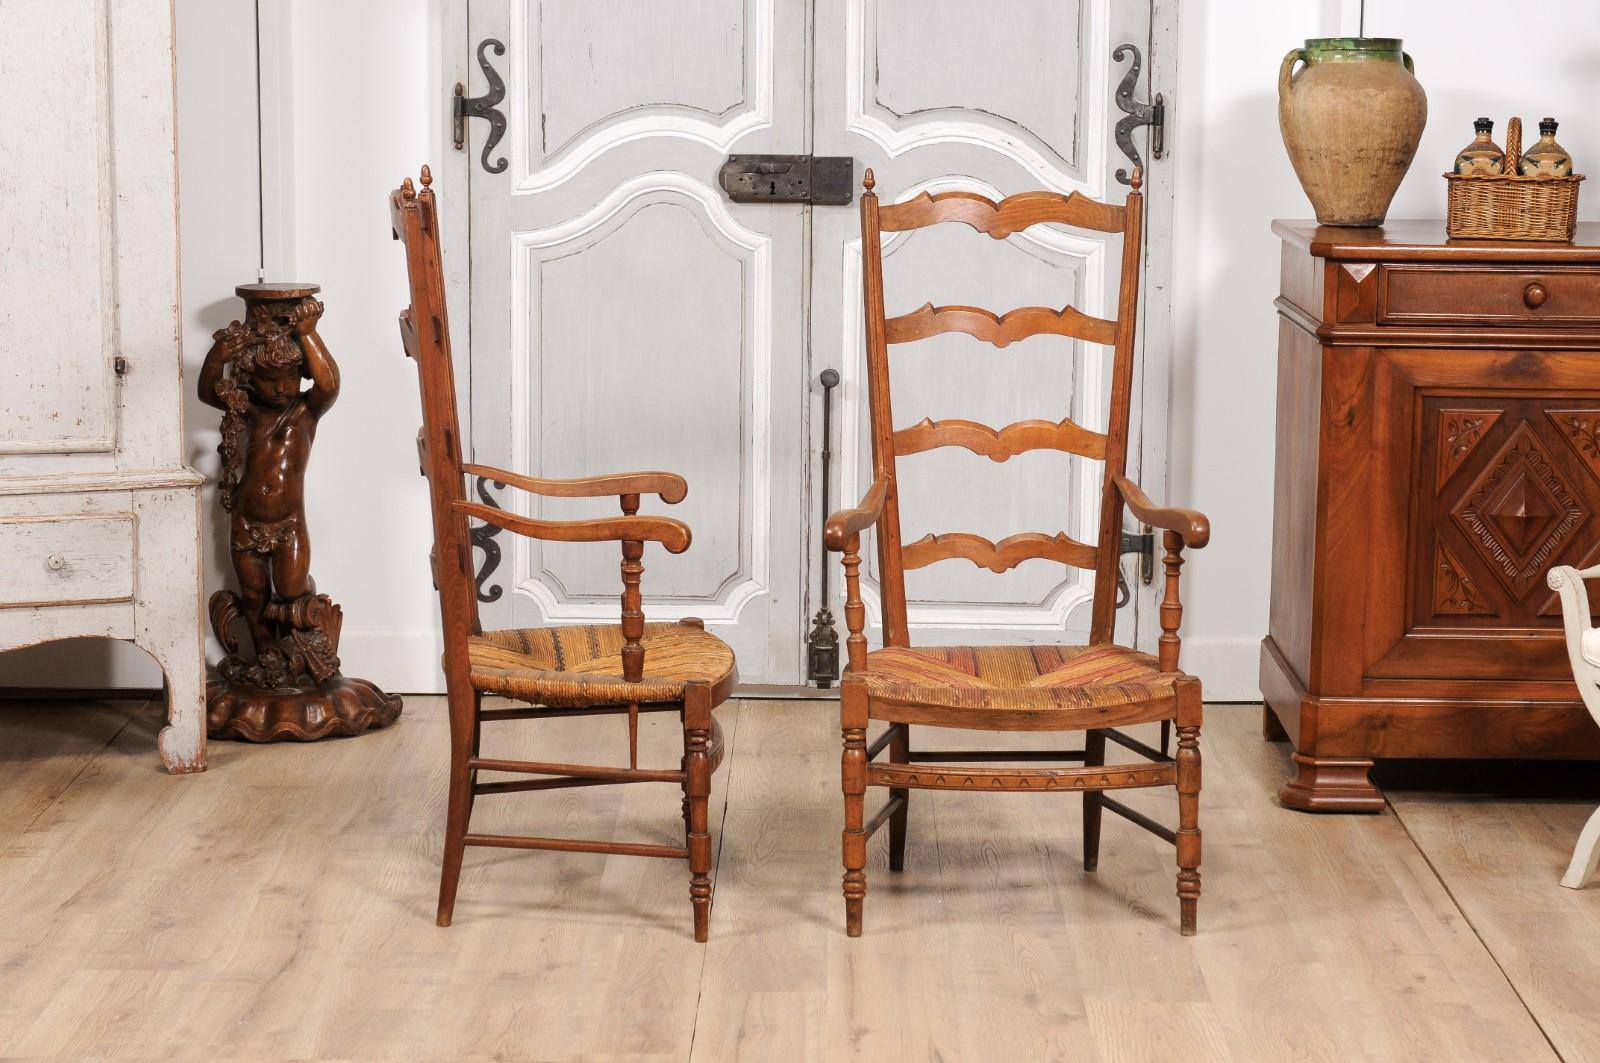 19th Century French 1890s Fruitwood Ladder Back Chairs with Straw Seats and Turned Legs For Sale